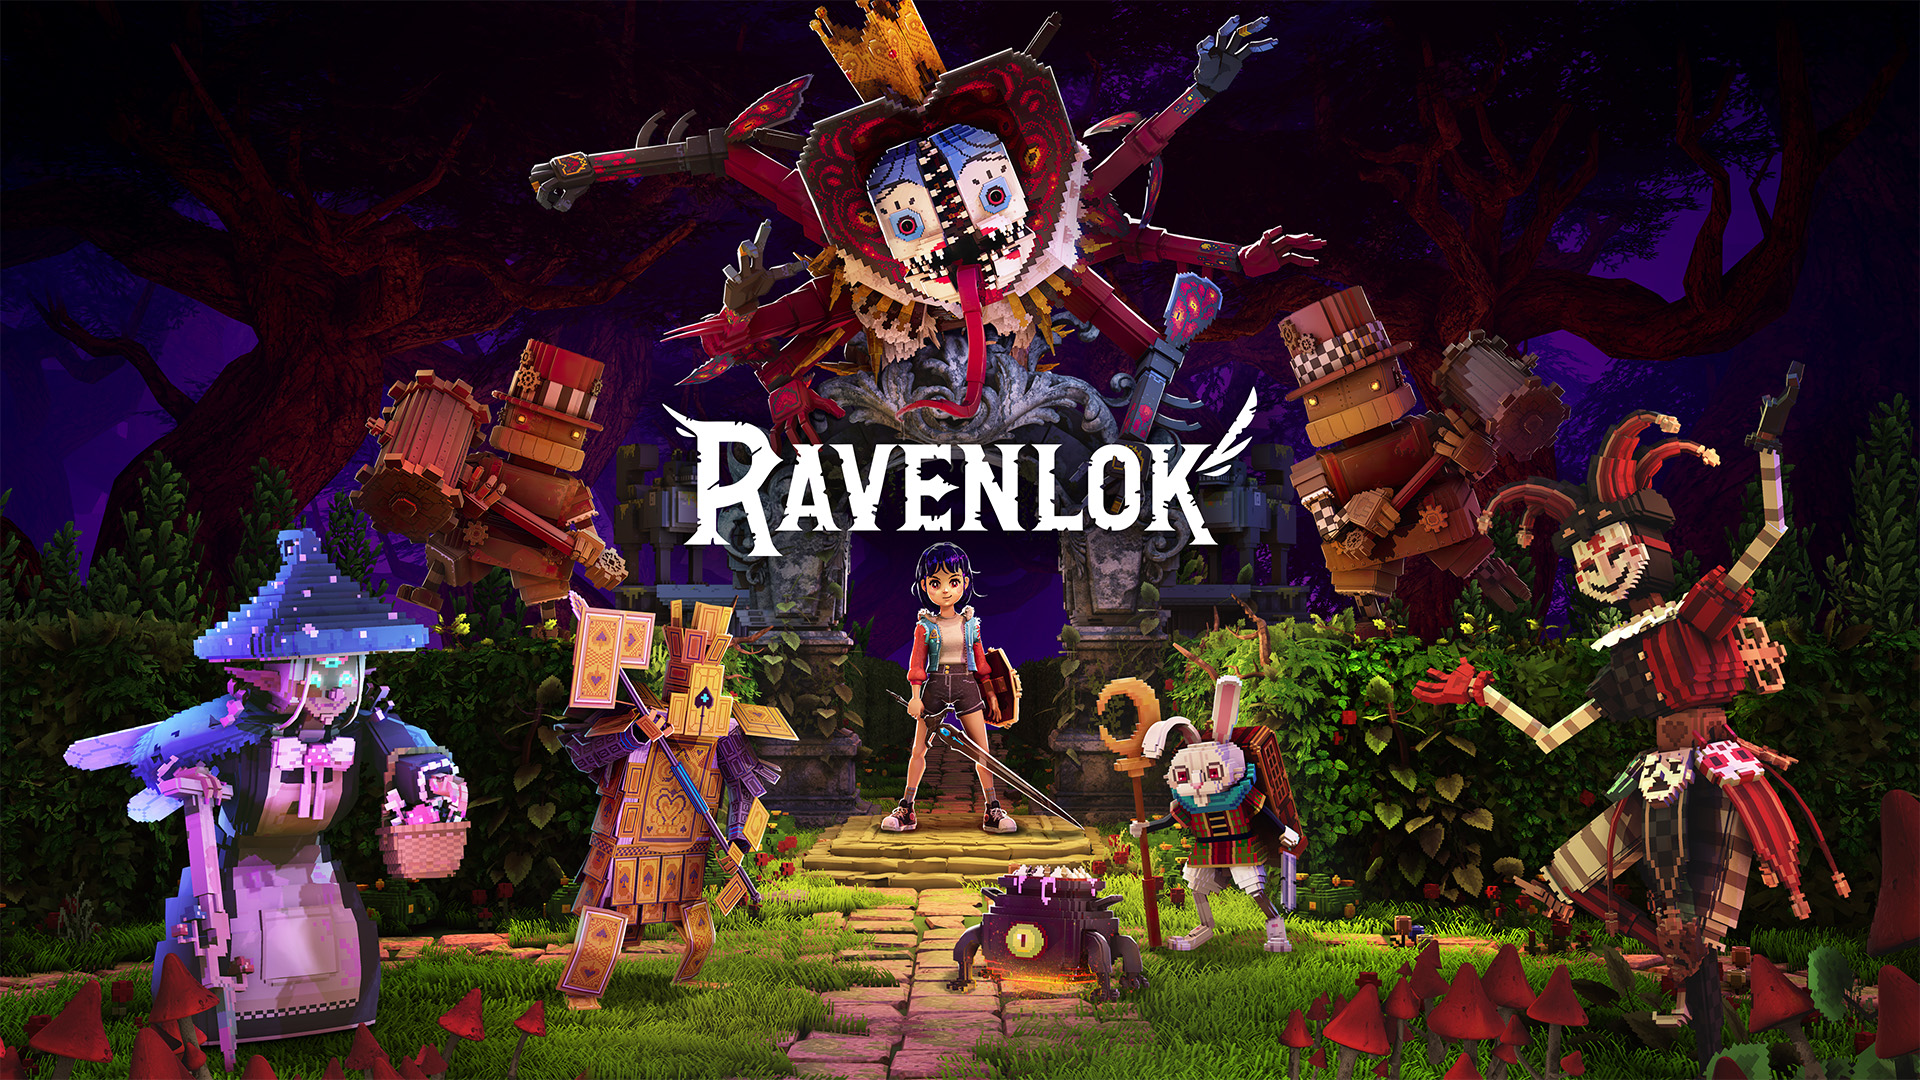 Xbox & Bethesda Games Showcase: Fall into the Fantastic World of Ravenlok Next Year with Game Pass HERO